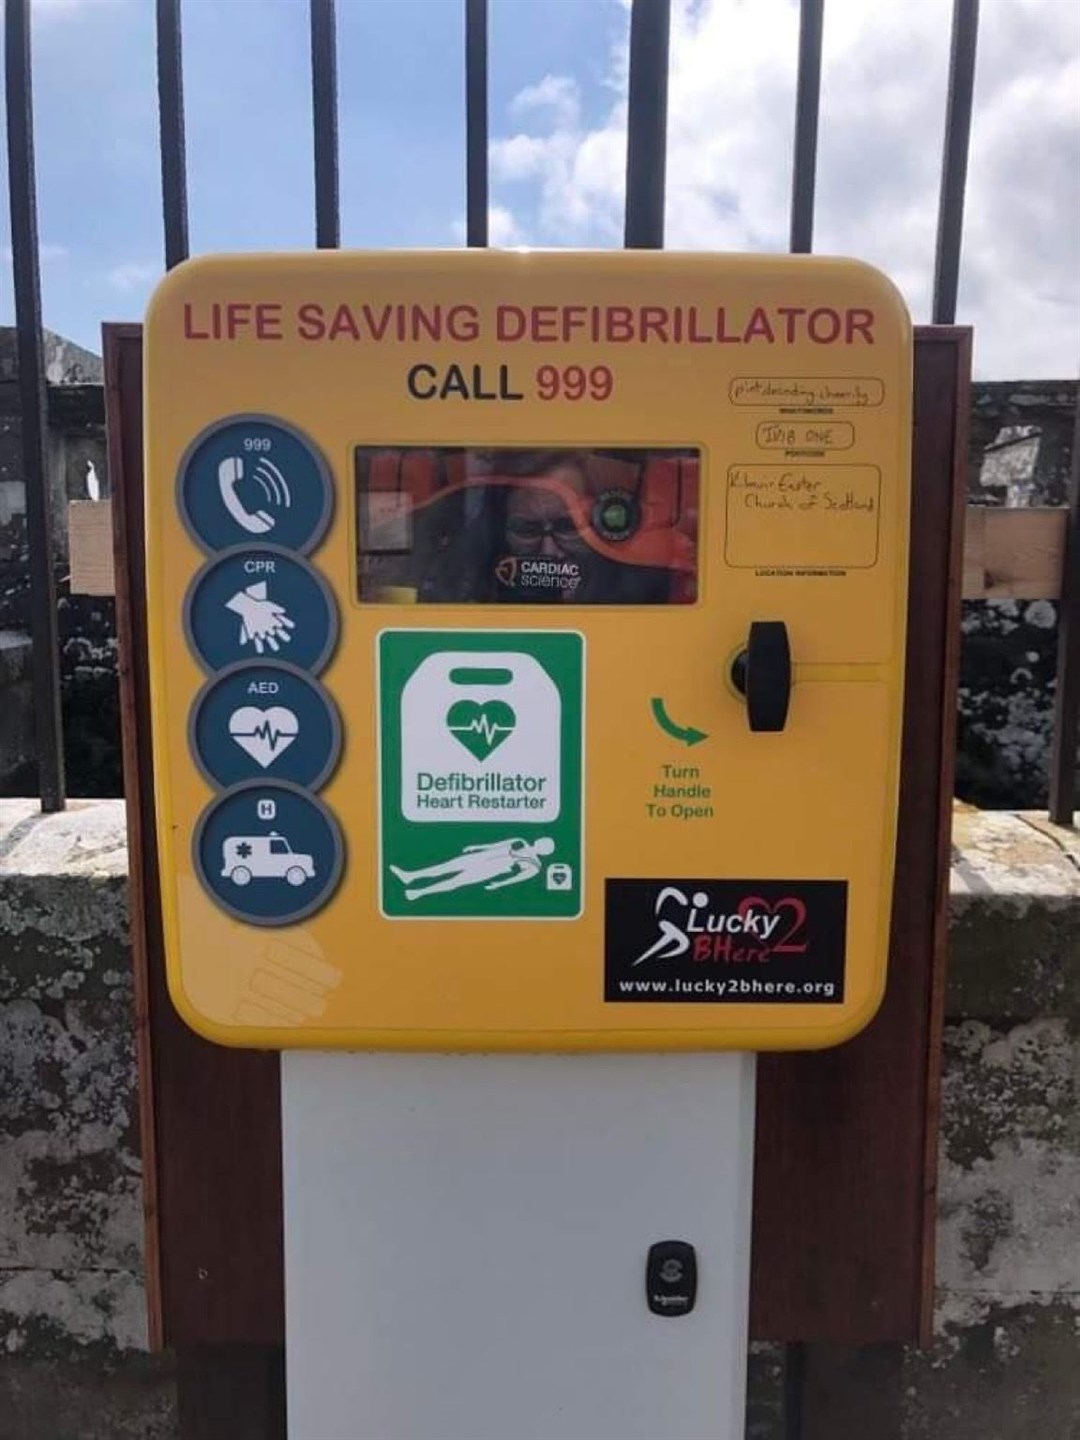 The church is keen to ensure people know how the defibrillator works. Picture: Kilmuir of Logie Easter Church of Scotland.